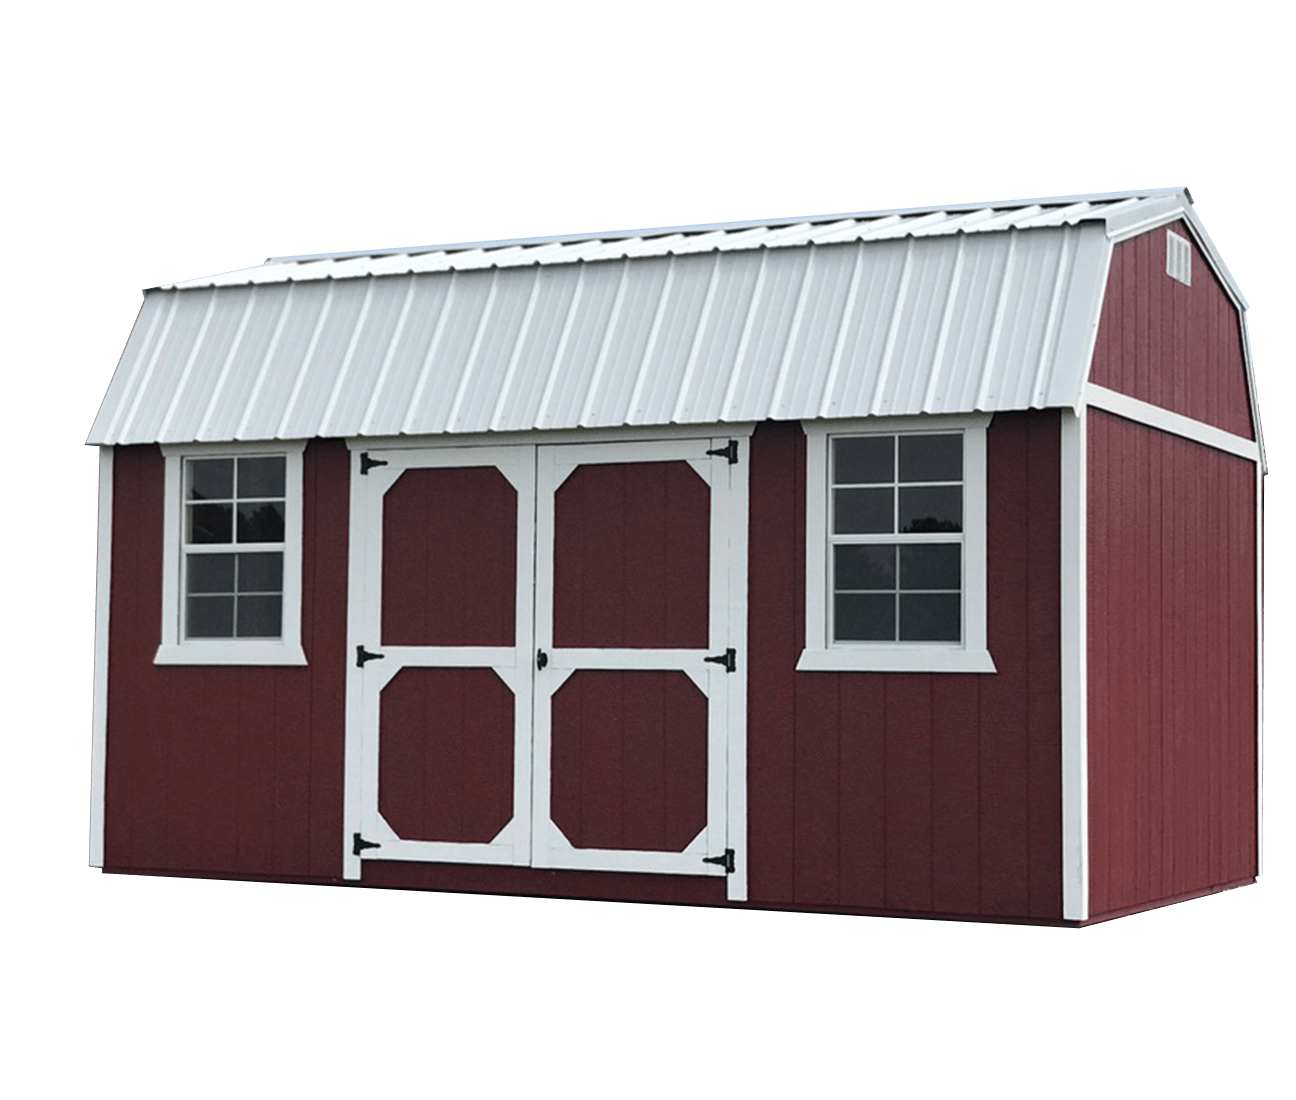 Red express barn with white trim and metal roof